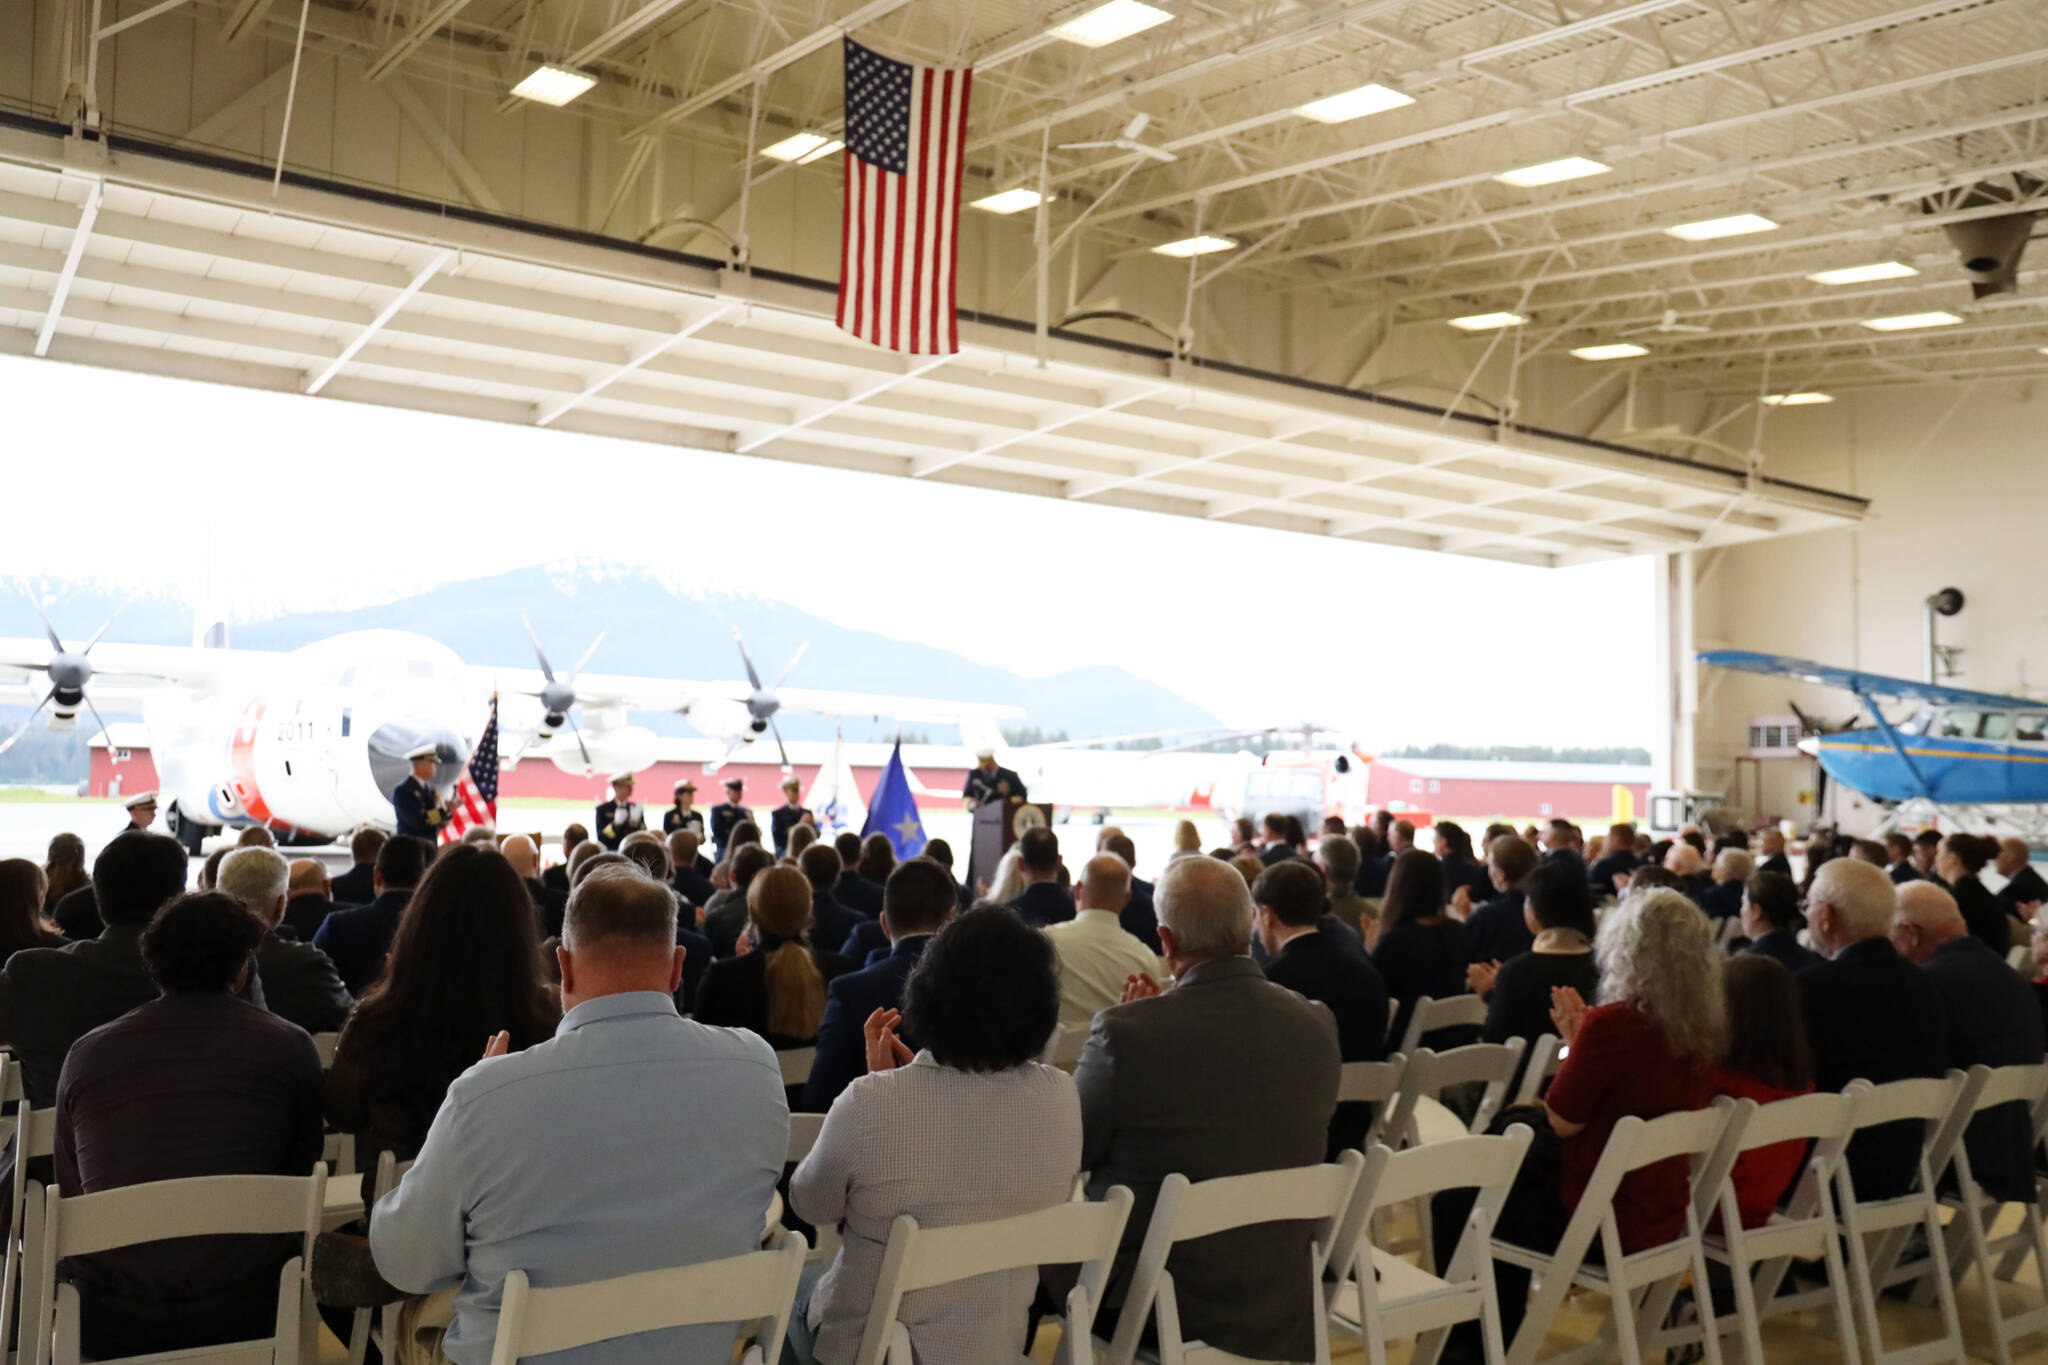 More than 100 guests including Coast Guard officials, family members and the Alaska’s Congressional Delegation attend the U.S. Coast Guard District 17 change-of-command ceremony at the Alaska Army National Guard Aviation Operating Facility in Juneau Friday morning. (Clarise Larson / Juneau Empire)